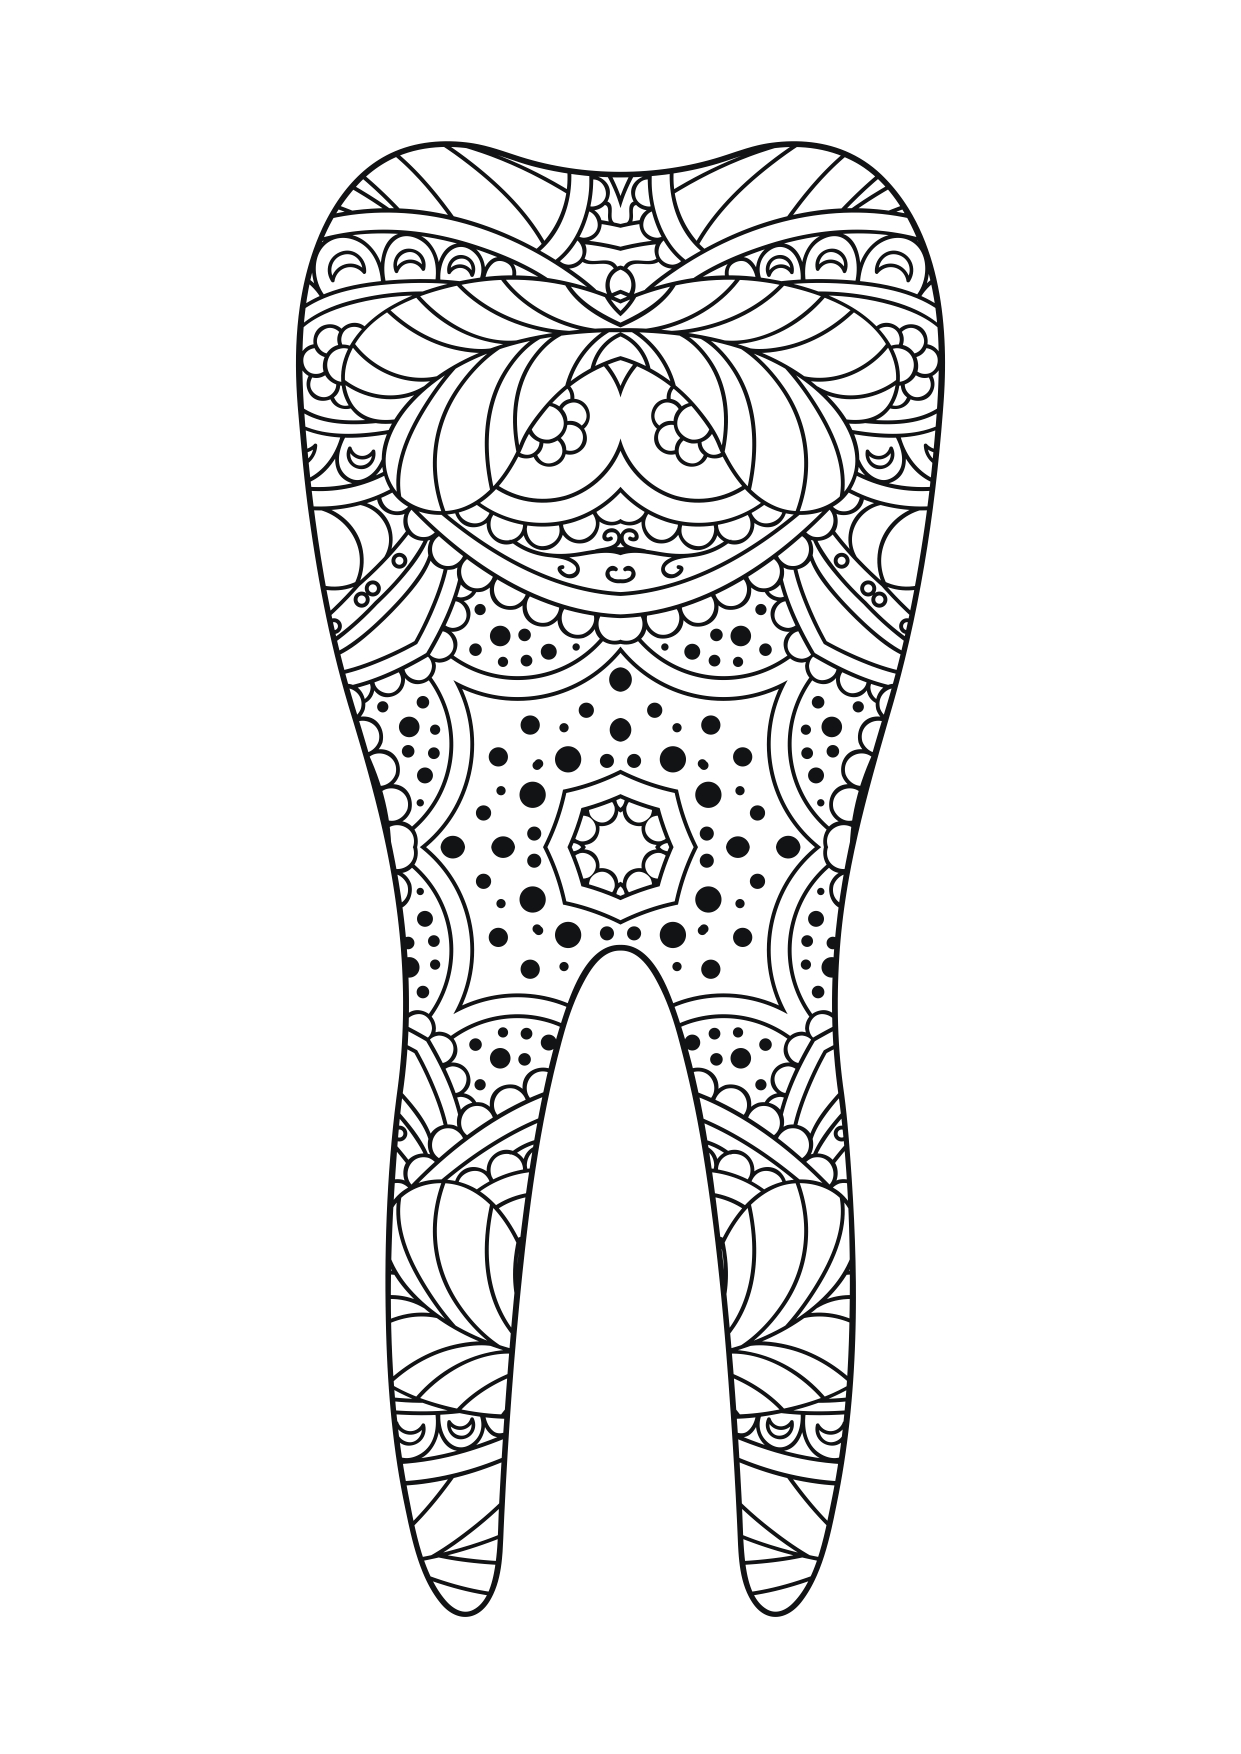 Mindful Colouring Tooth Design